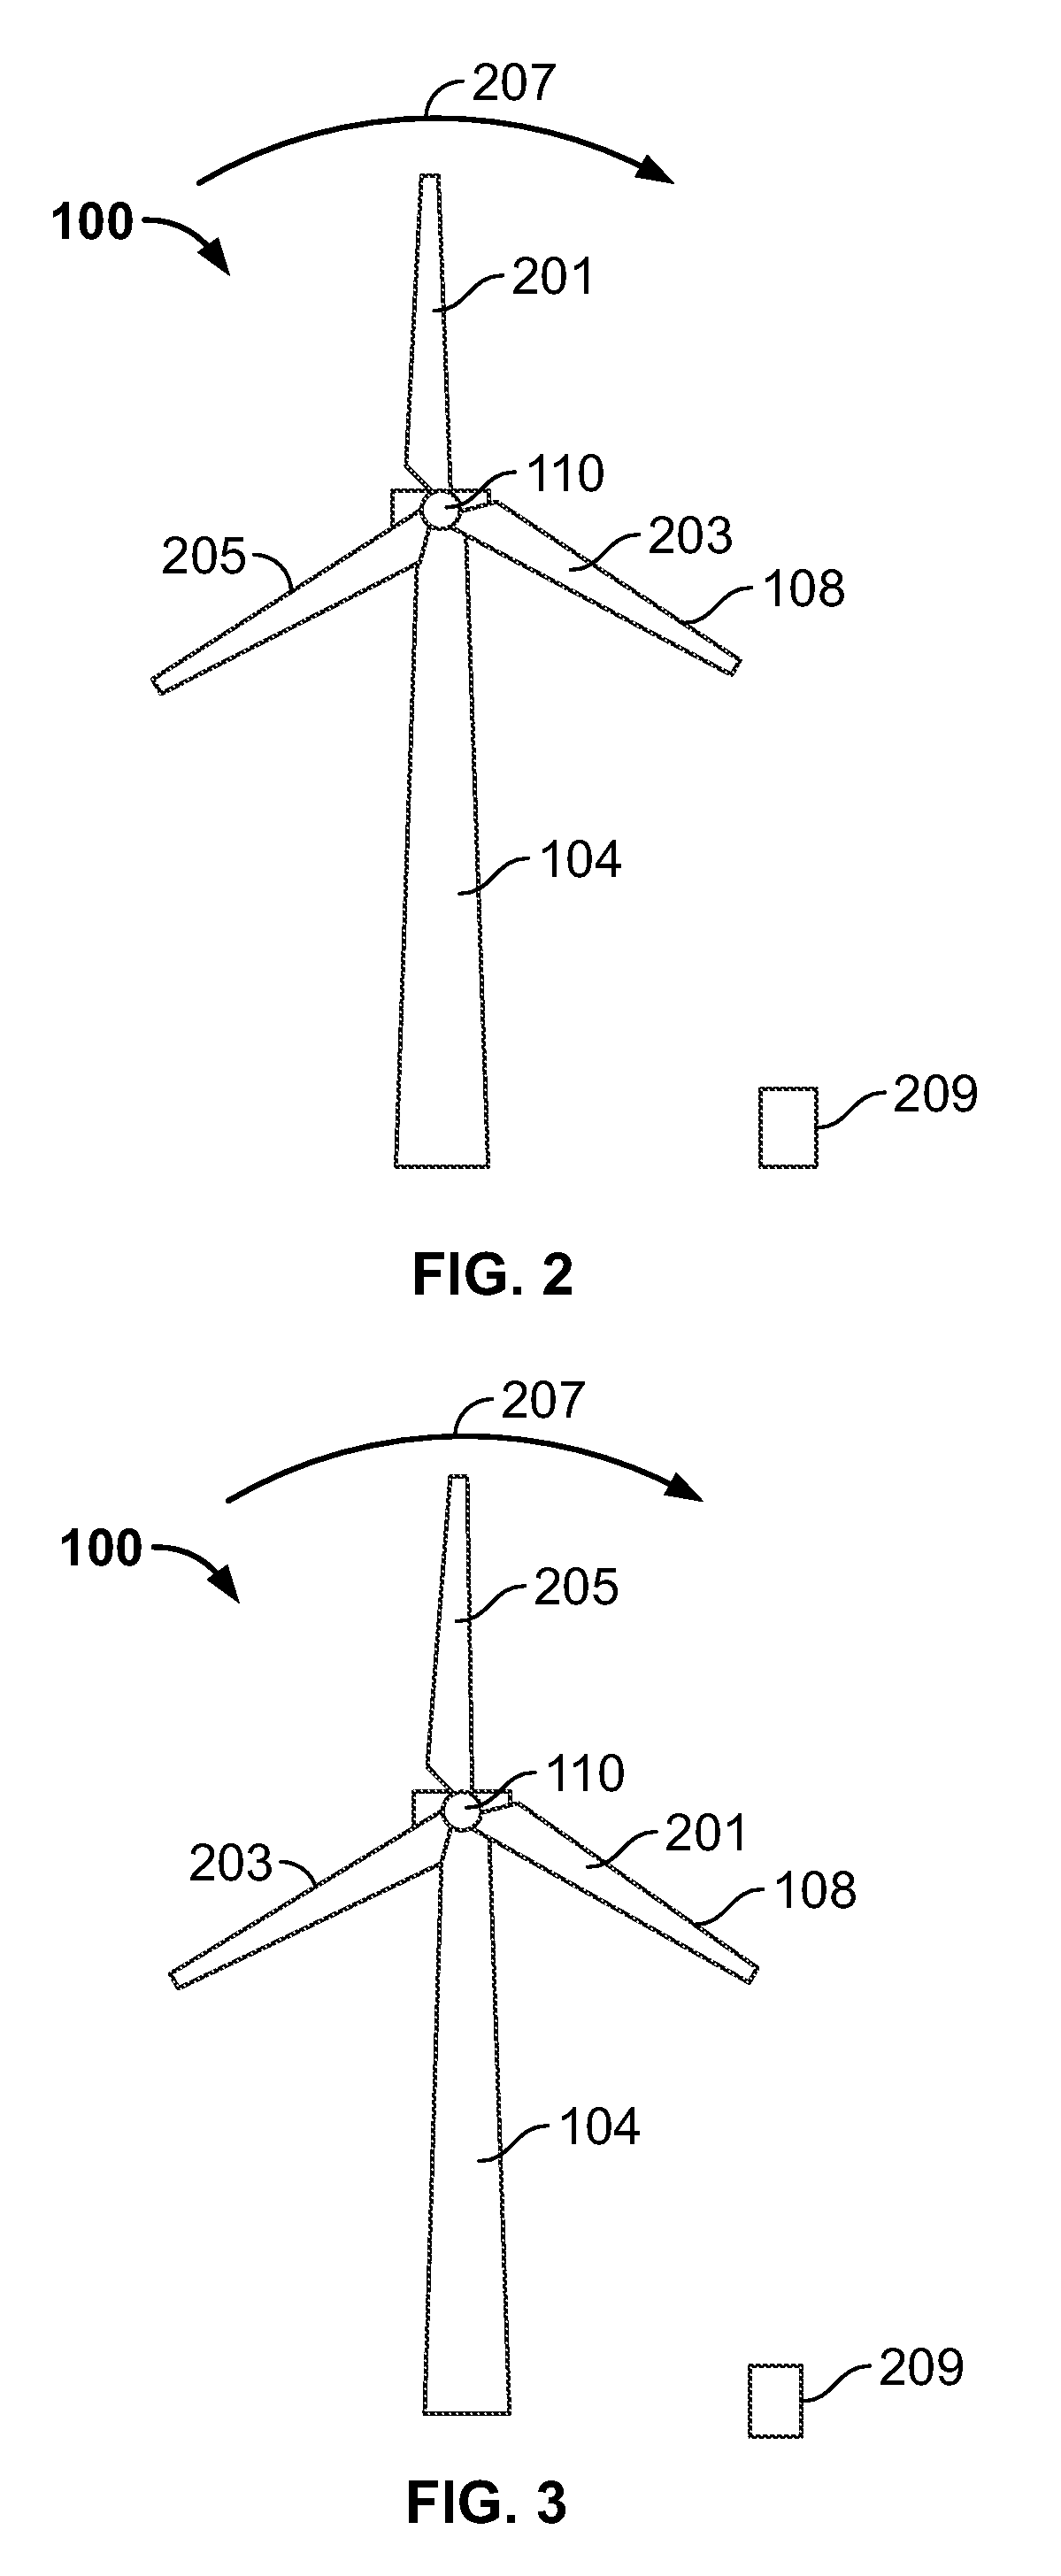 Individual blade noise measurement system and method for wind turbines